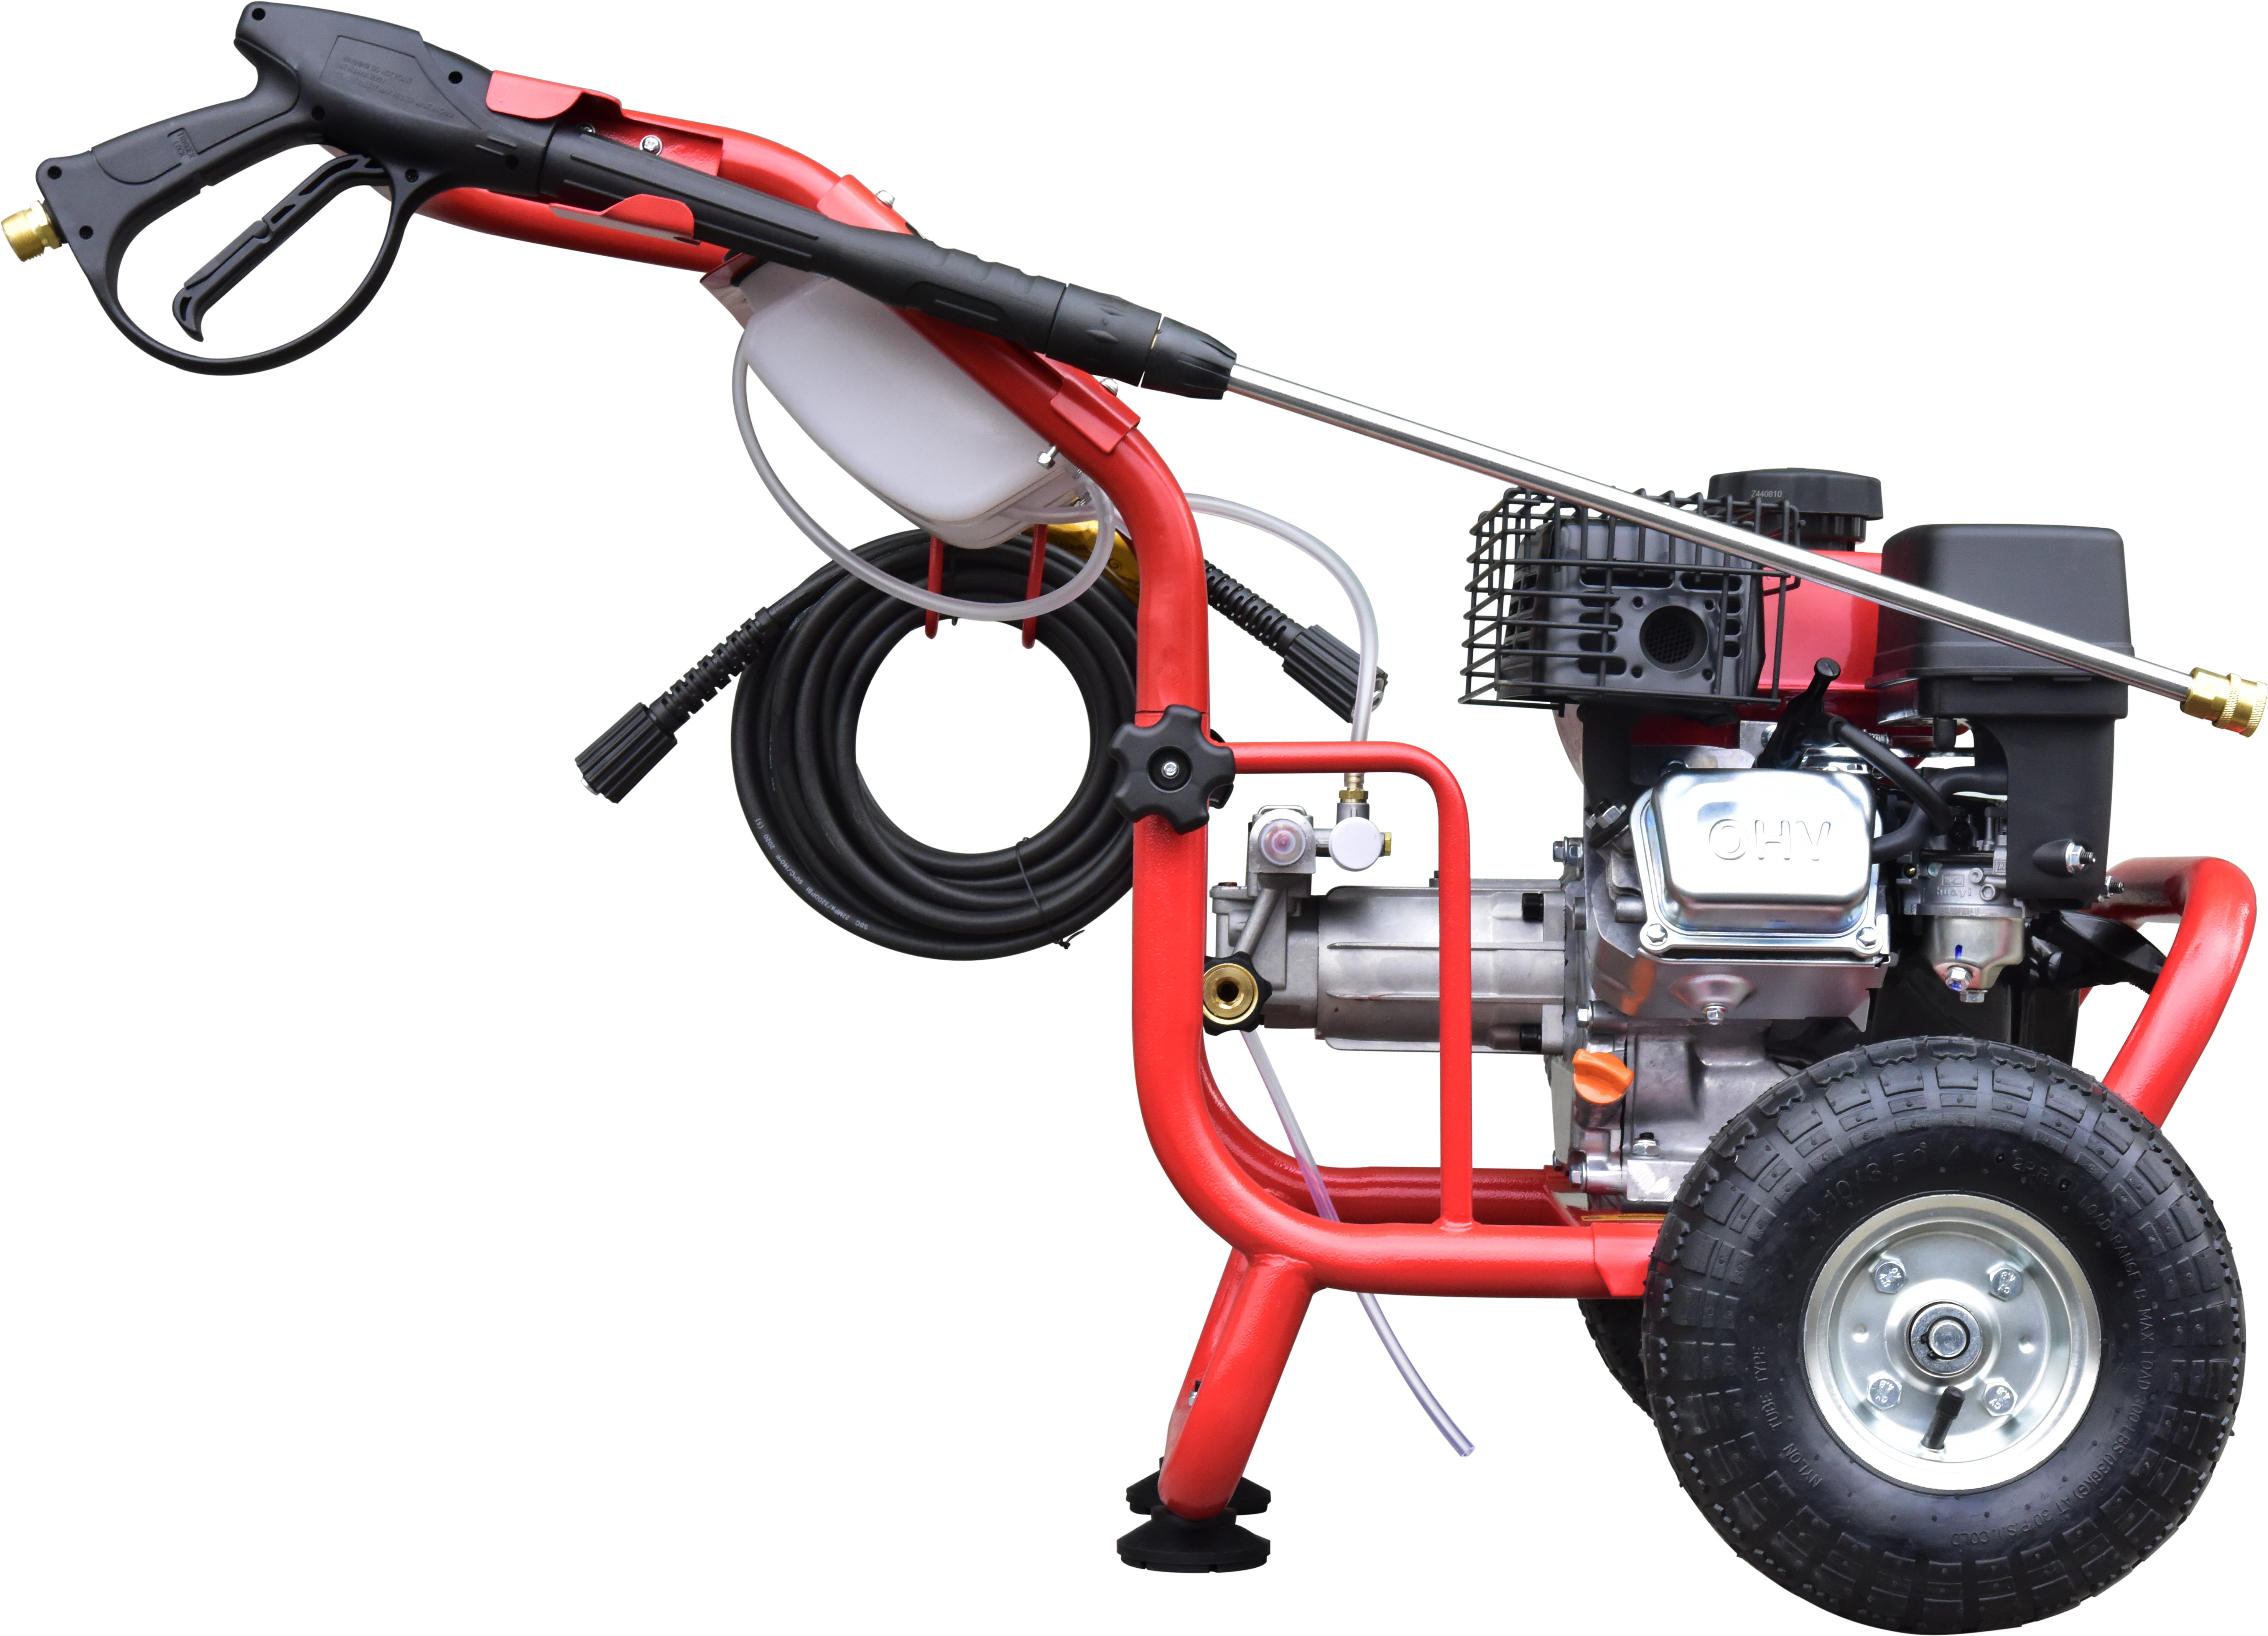 All Power America 3100 PSI, 2.6 GPM Gas Pressure Washer w/ 30 ft High Pressure Hose, C.A.R.B. Compliant, APW5118A - 2